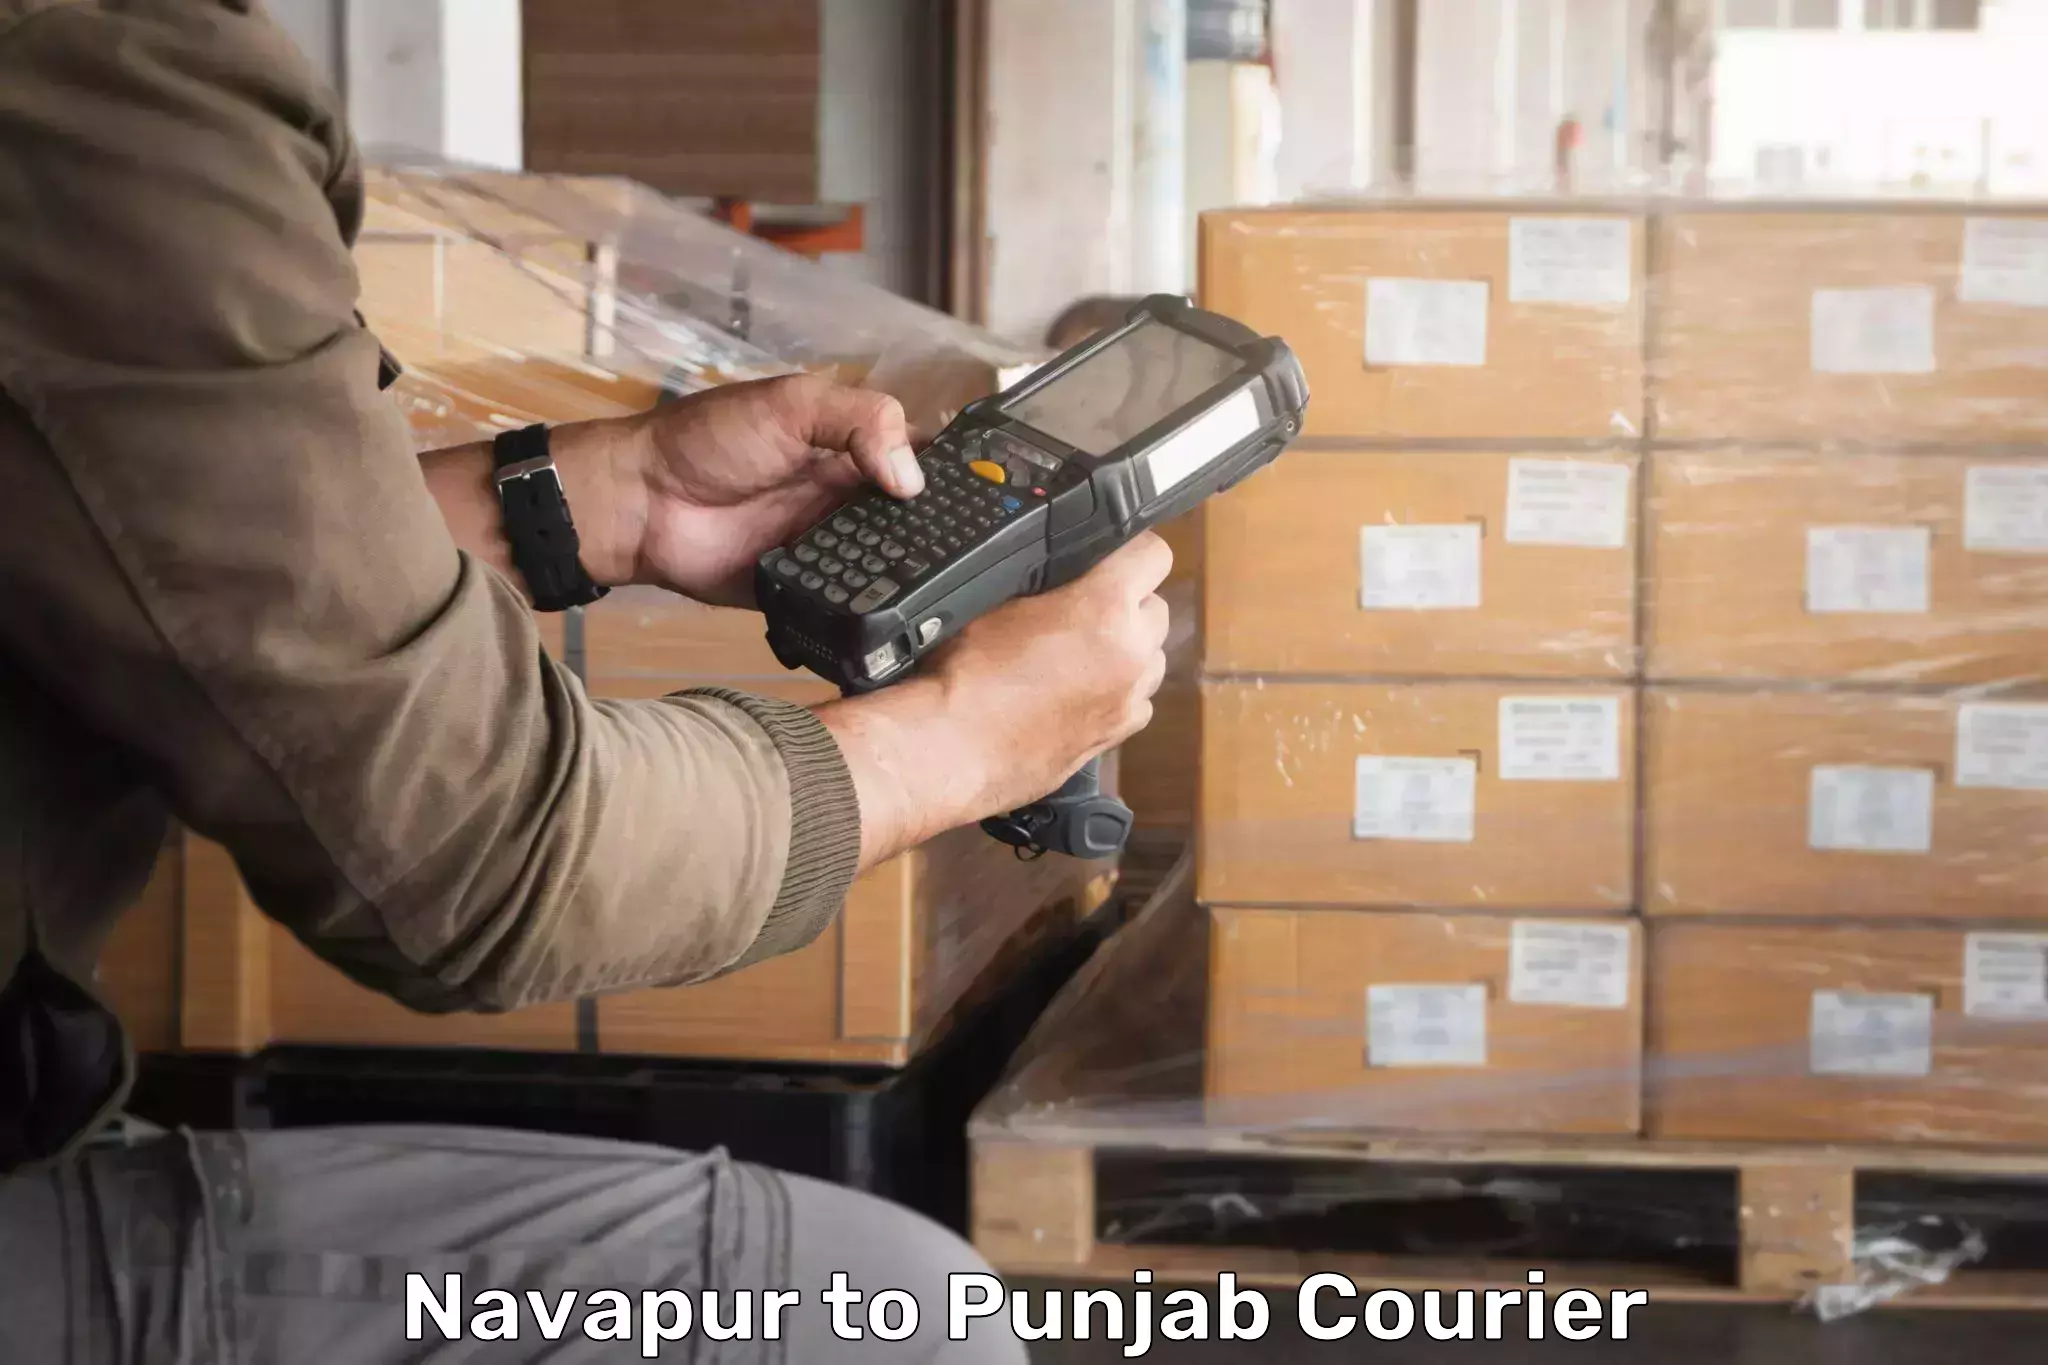 Reliable parcel services Navapur to Amritsar